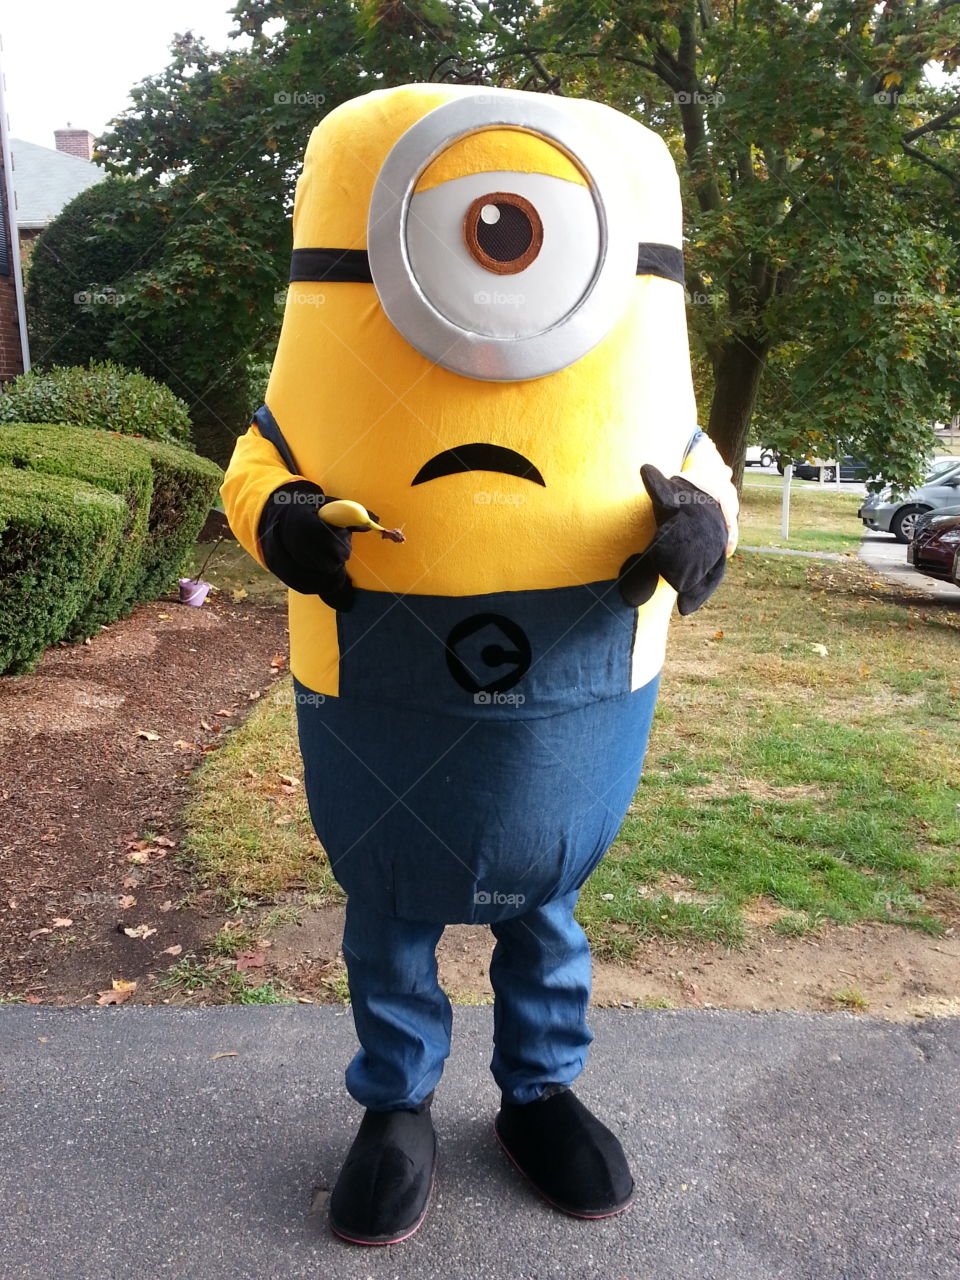 032. a very excited minion fan in his new minion costume